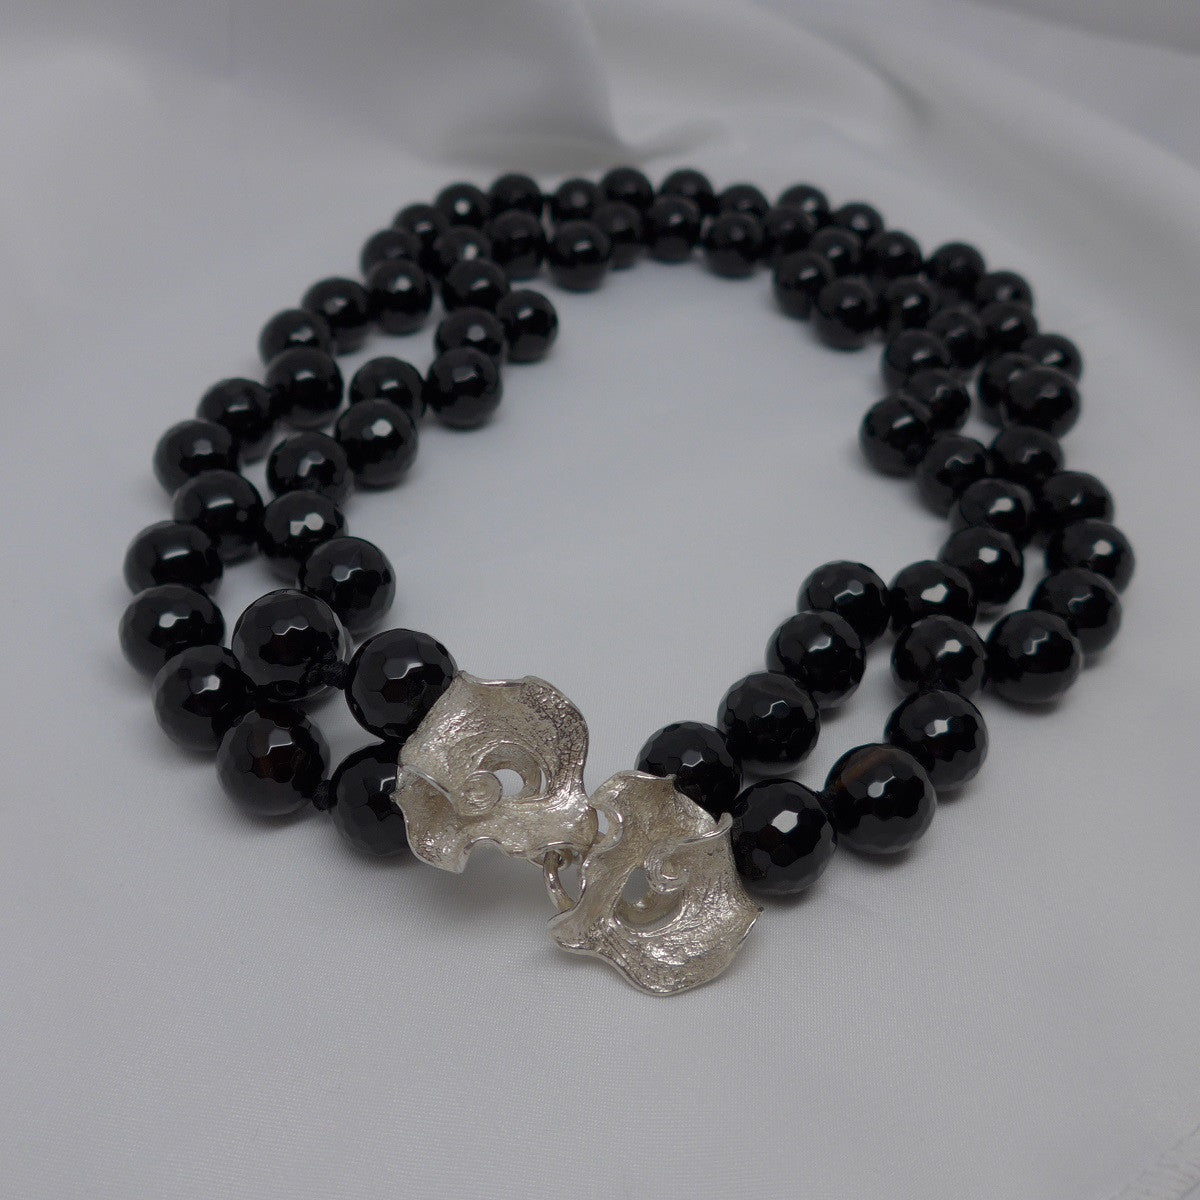 Two Strand Faceted Onyx with Exclusive Clasp Gemstone Necklace